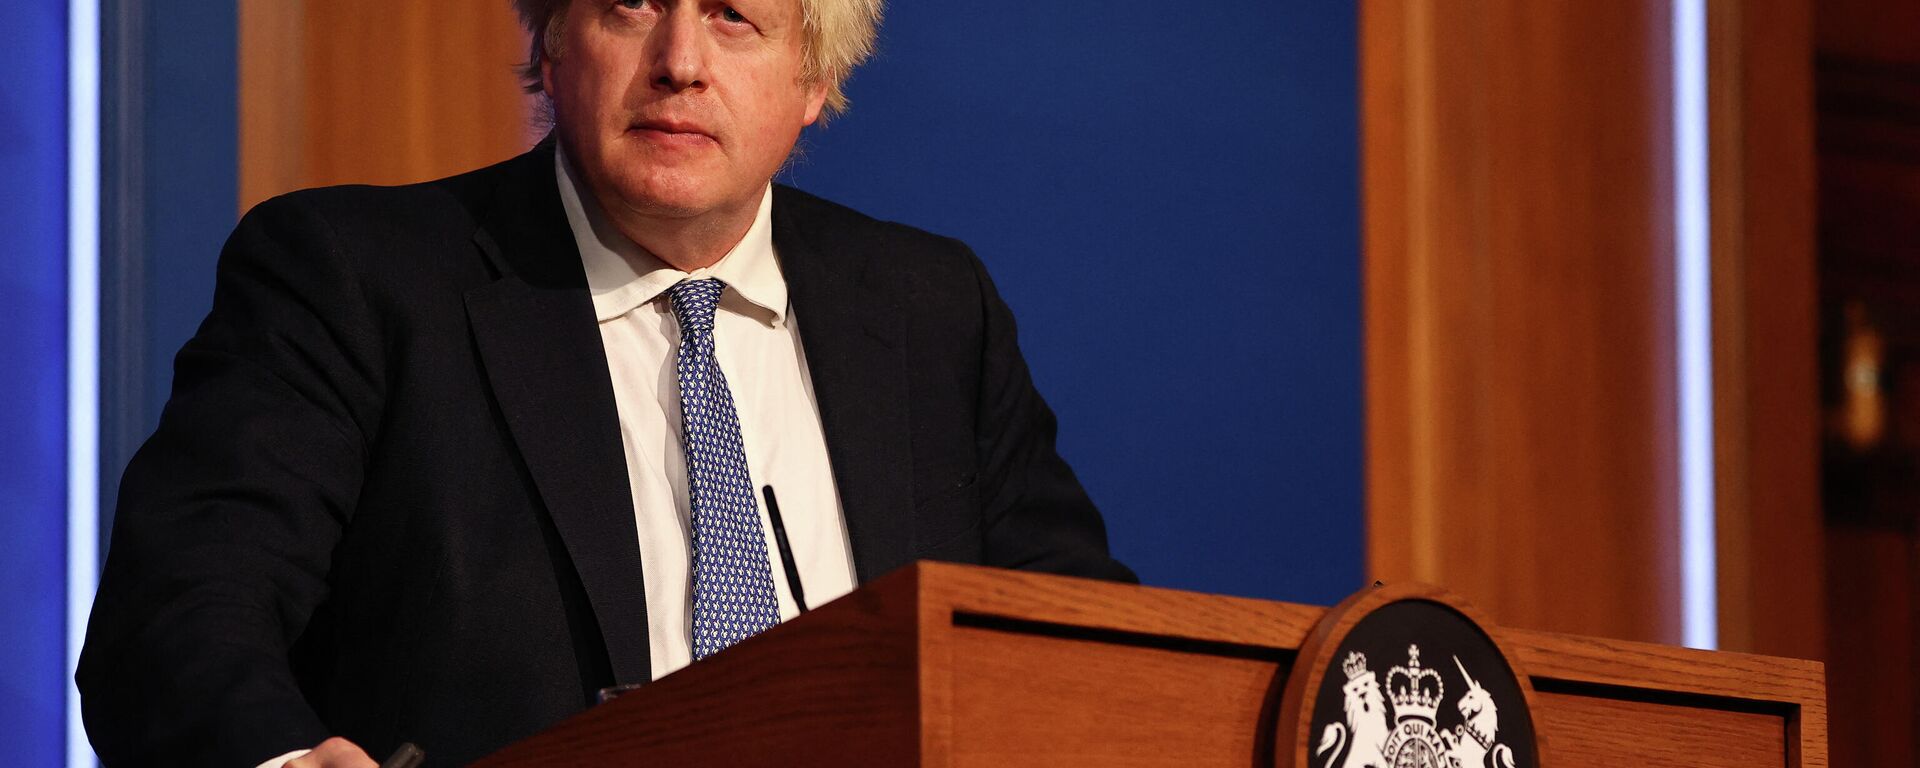 Britain's Prime Minister Boris Johnson holds a press conference for the latest Covid-19 update in the Downing Street briefing room in central London on December 8, 2021 - Sputnik International, 1920, 11.01.2022